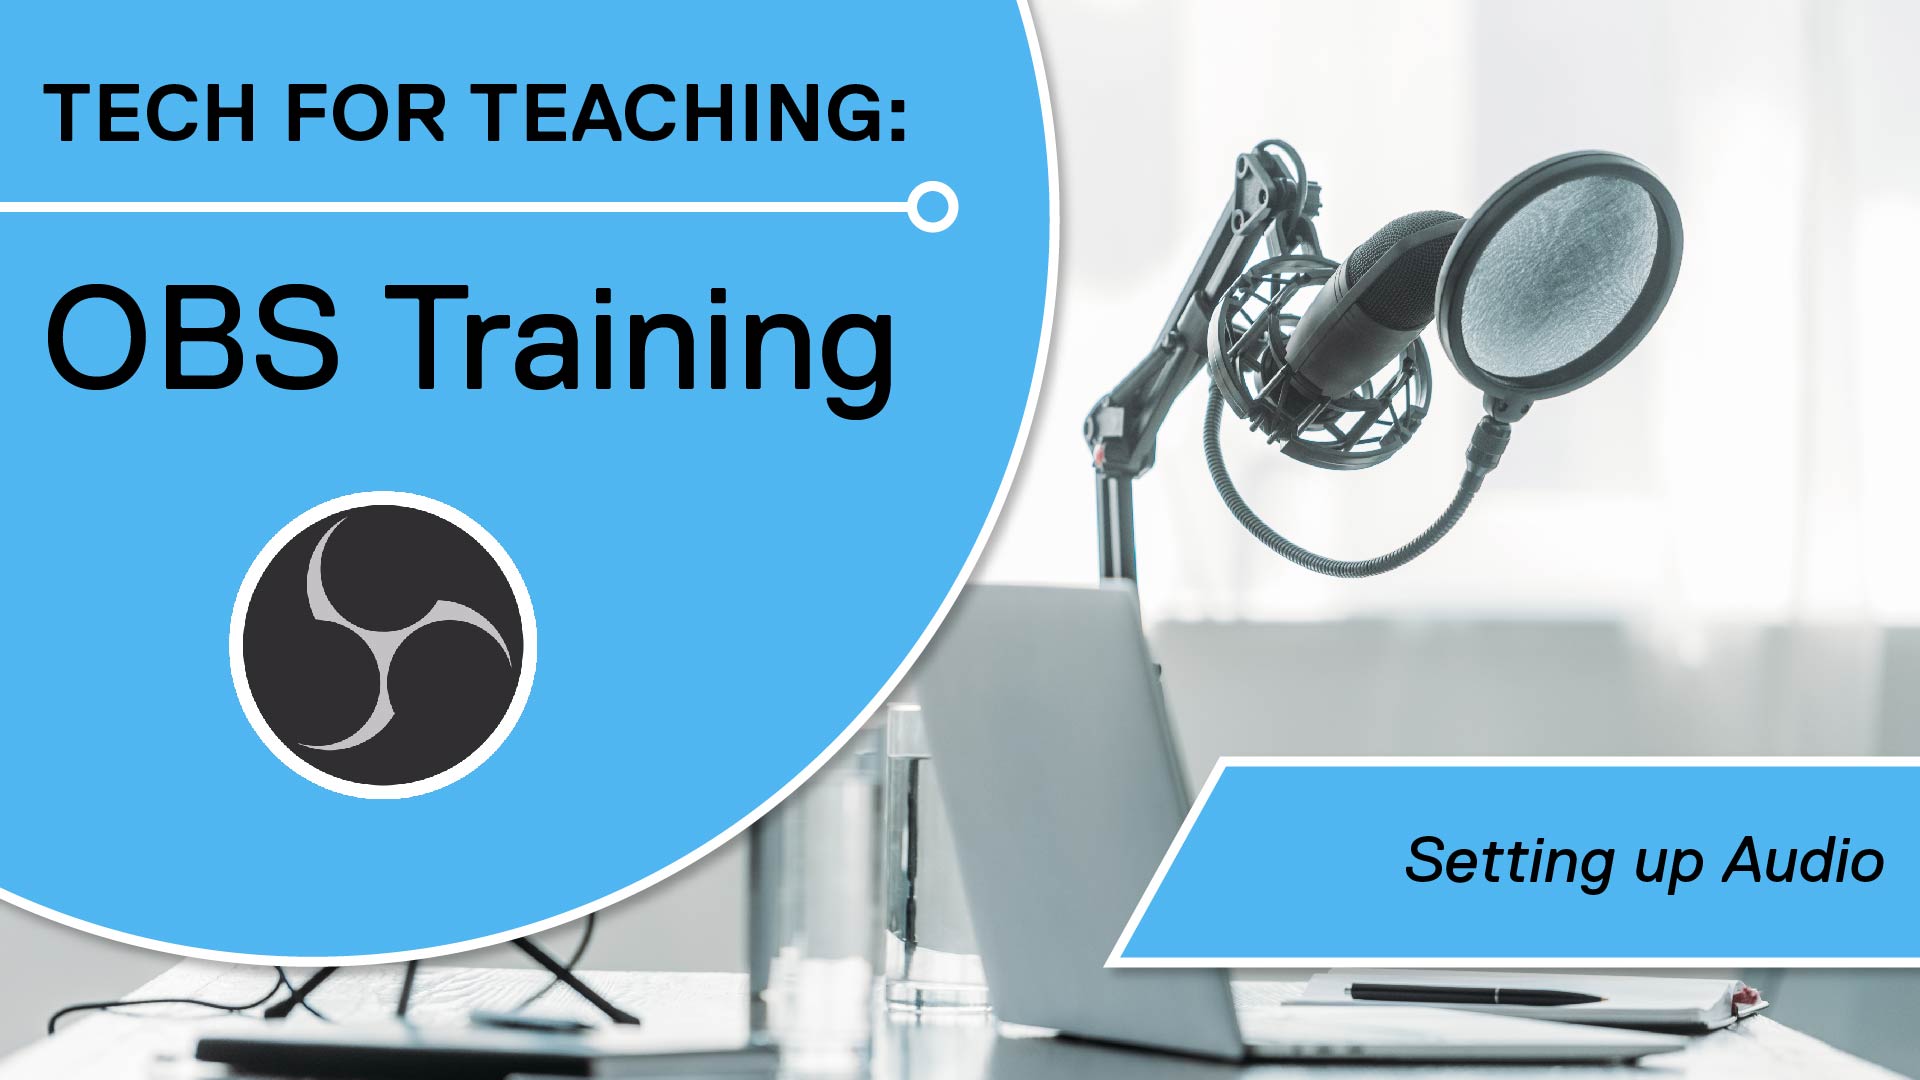 Tech for Teaching: OBS Training - Setting up Audio